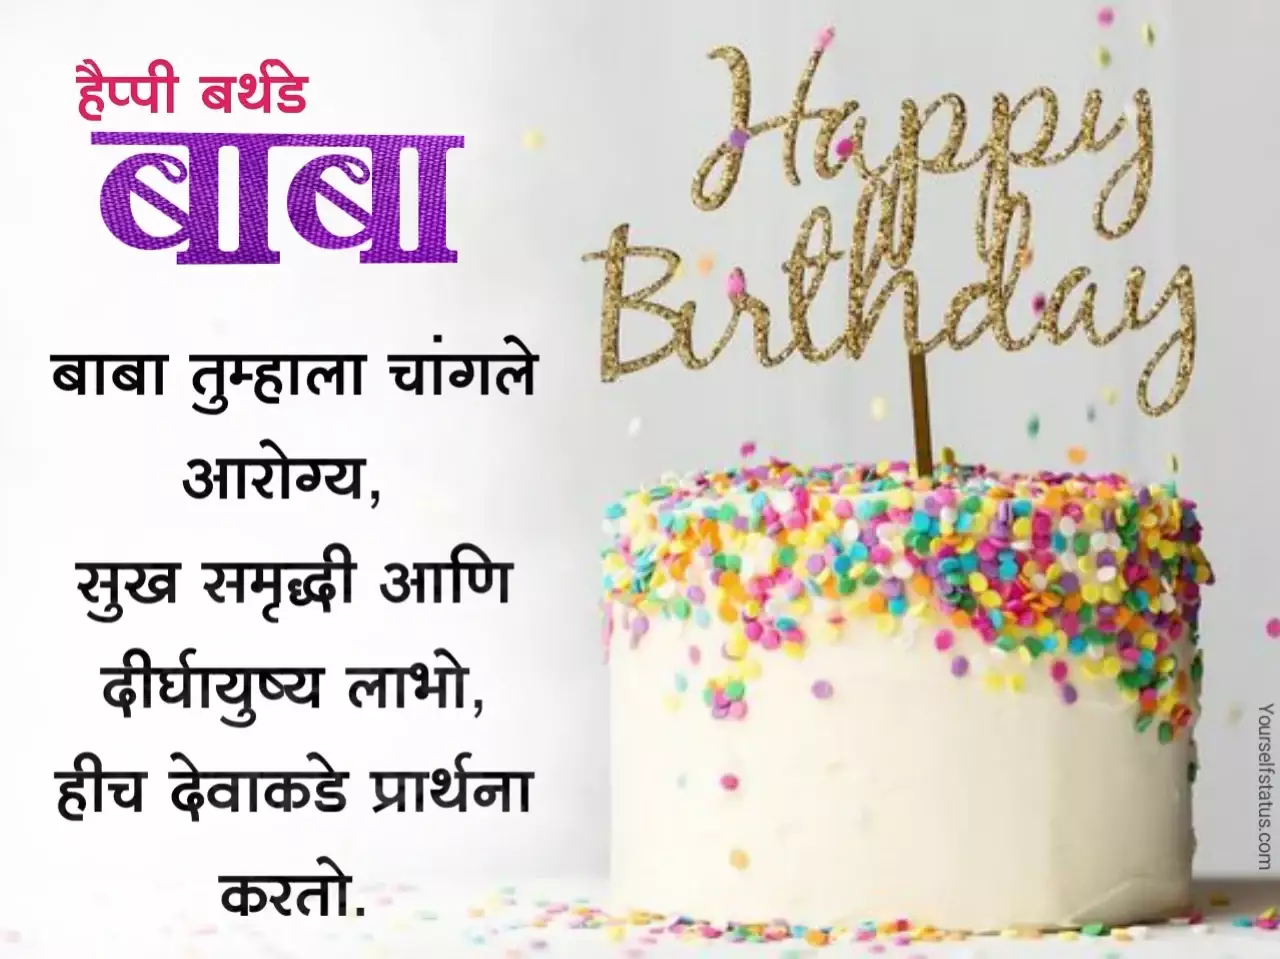 Birthday wishes for father in marathi